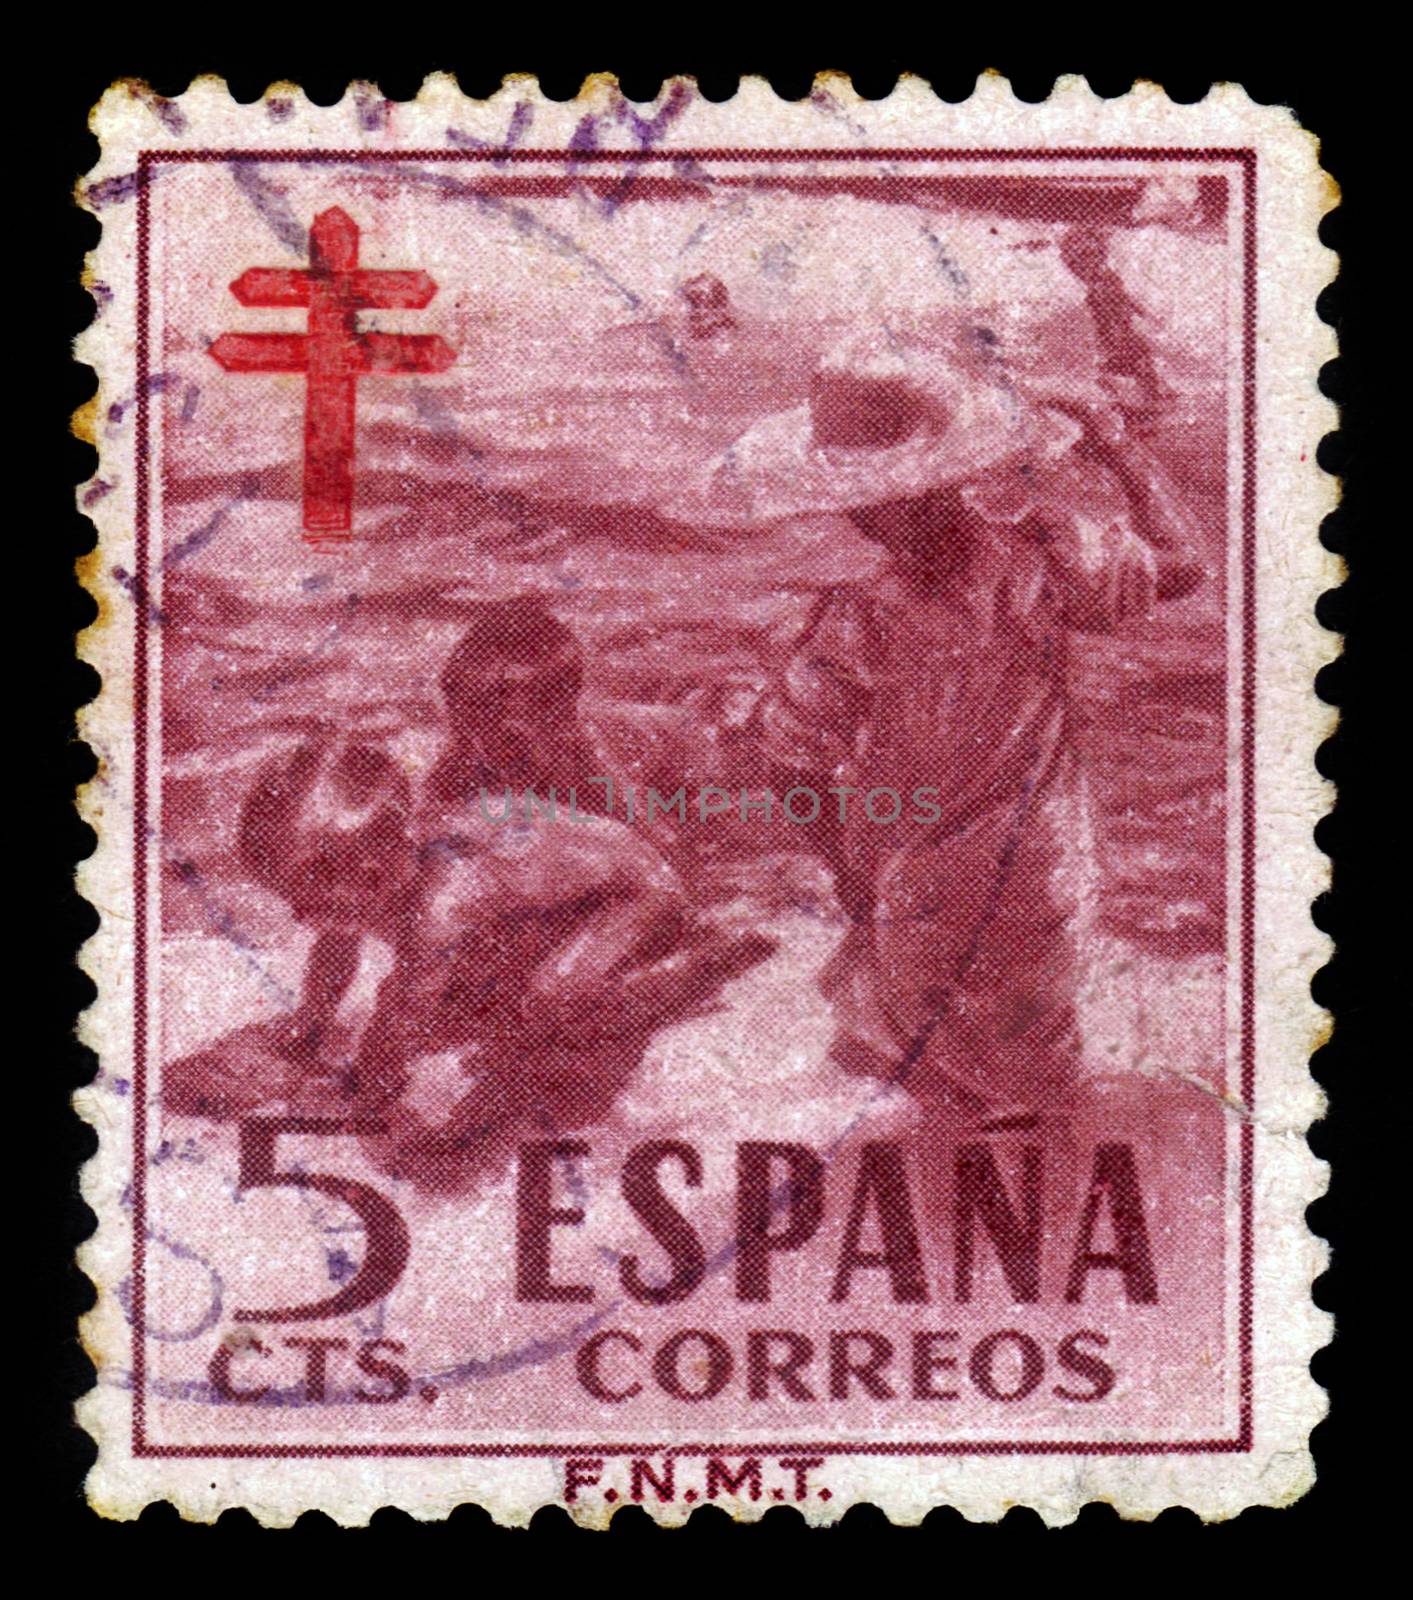 SPAIN - CIRCA 1951: A stamp printed by Spain shows children at play on the beach and Cross of Lorraine, series pro-tuberculosis, circa 1951